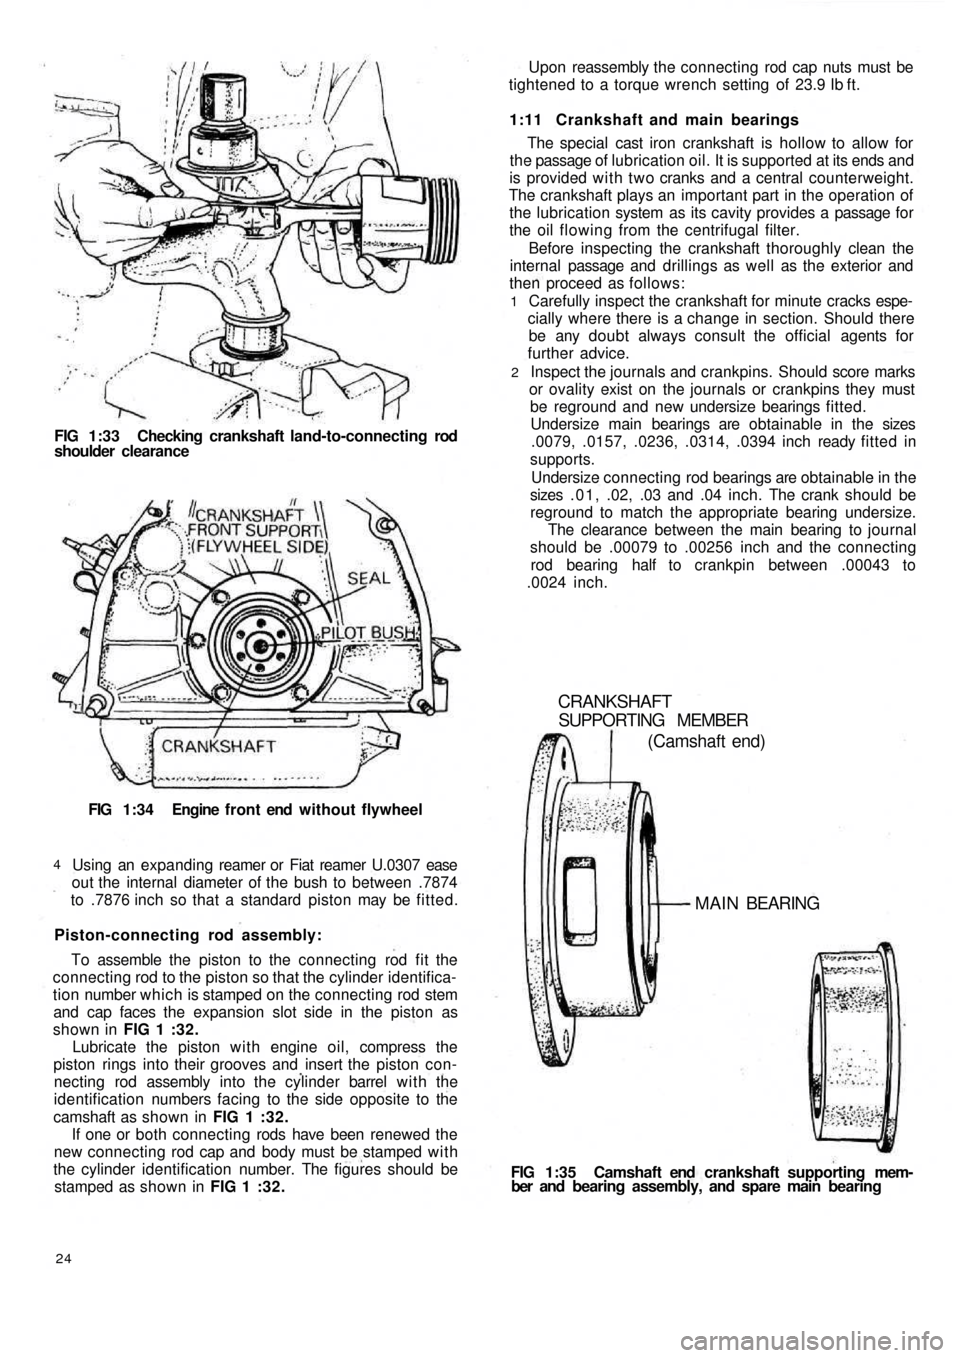 FIAT 500 1959 1.G Workshop Manual FIG 1:33 Checking crankshaft land-to-connecting rod
shoulder clearance
FIG 1:34 Engine  f r o n t  end  without flywheel
Using an expanding reamer or Fiat reamer U.0307 ease
out the internal diameter 